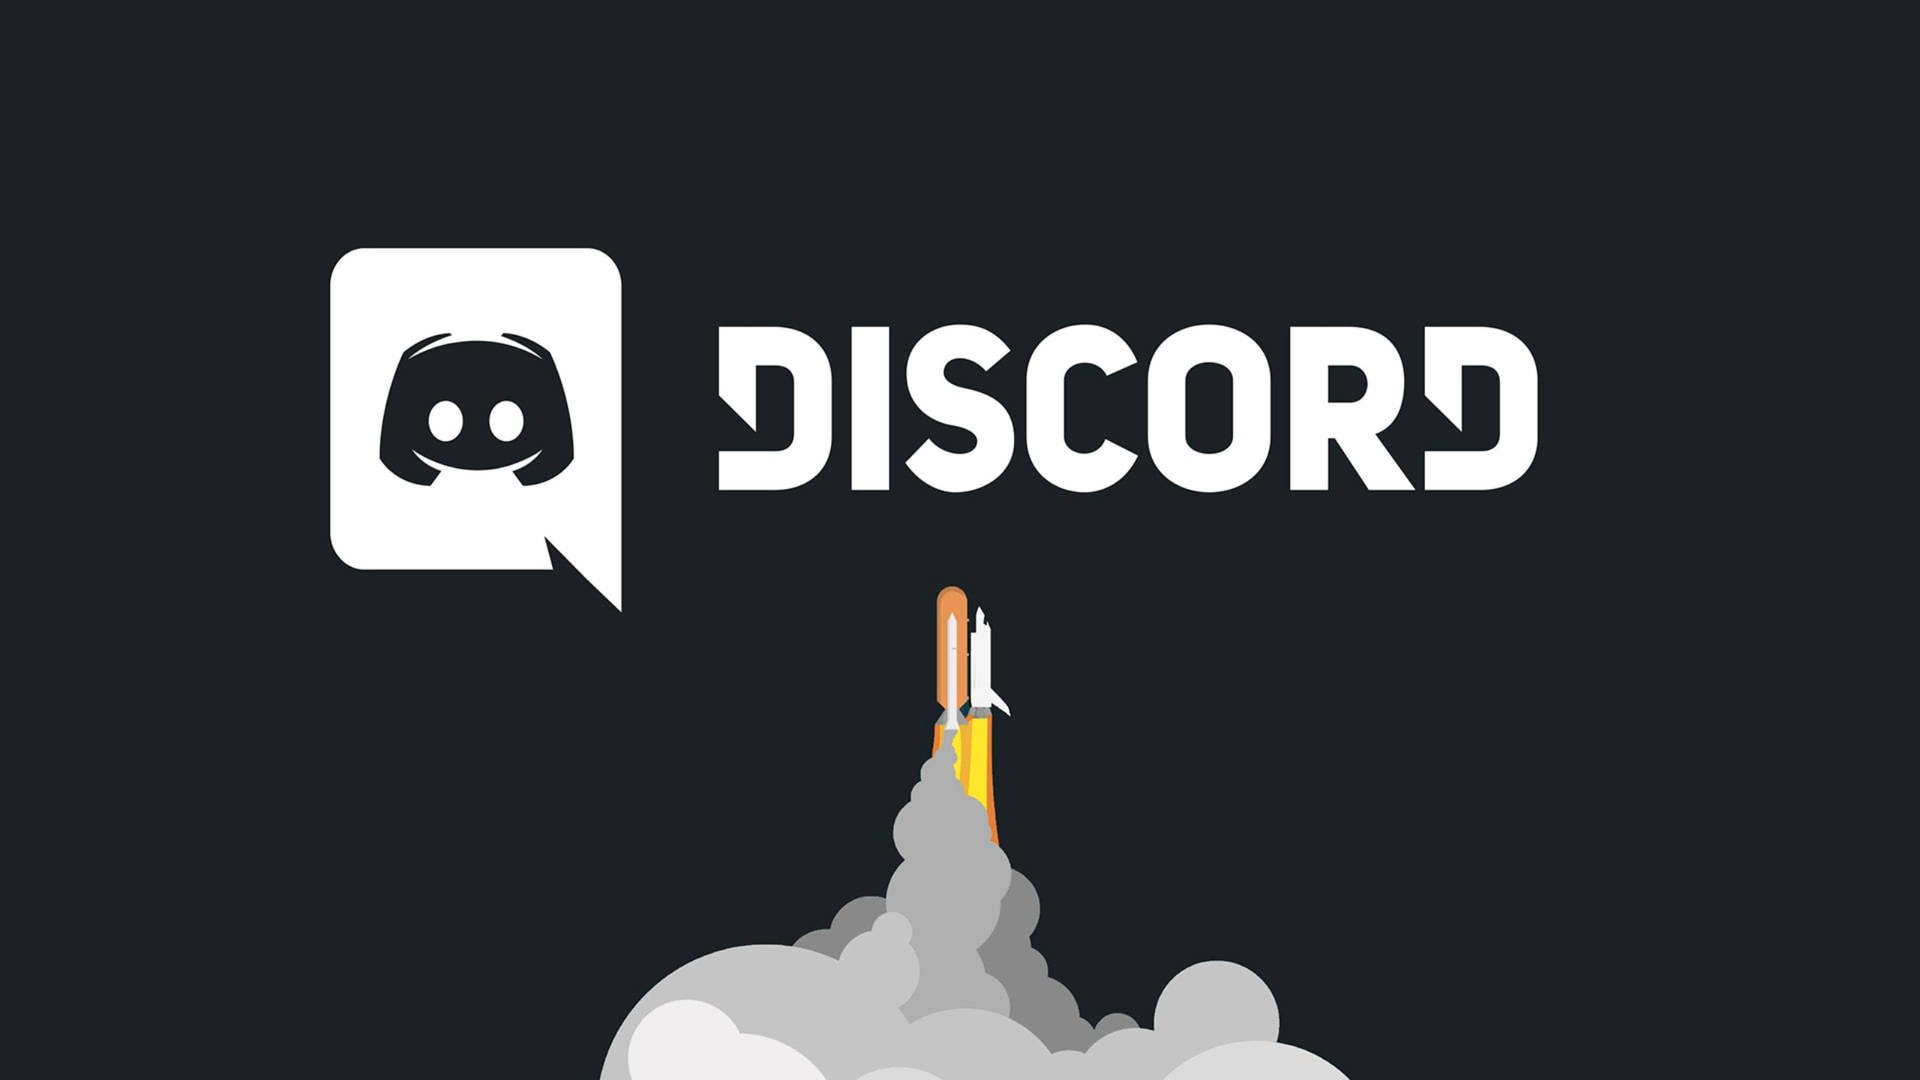 Discord Launching Rocket Vector Background